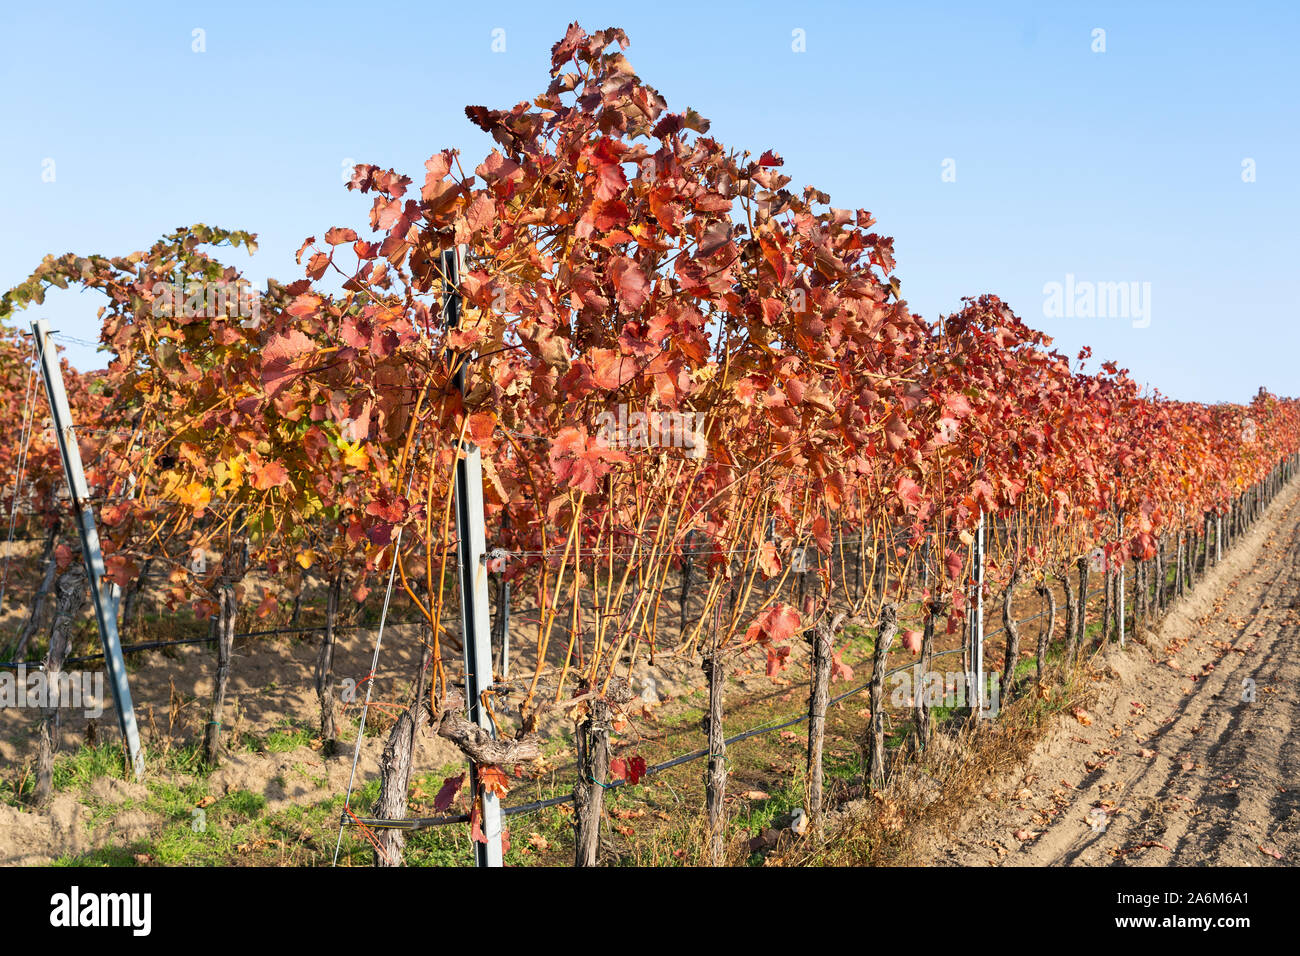 Red leaved European grapevines in autumn / fall in a vineyard in the the famous winemaking area of Langenlois, Lower Austria Stock Photo